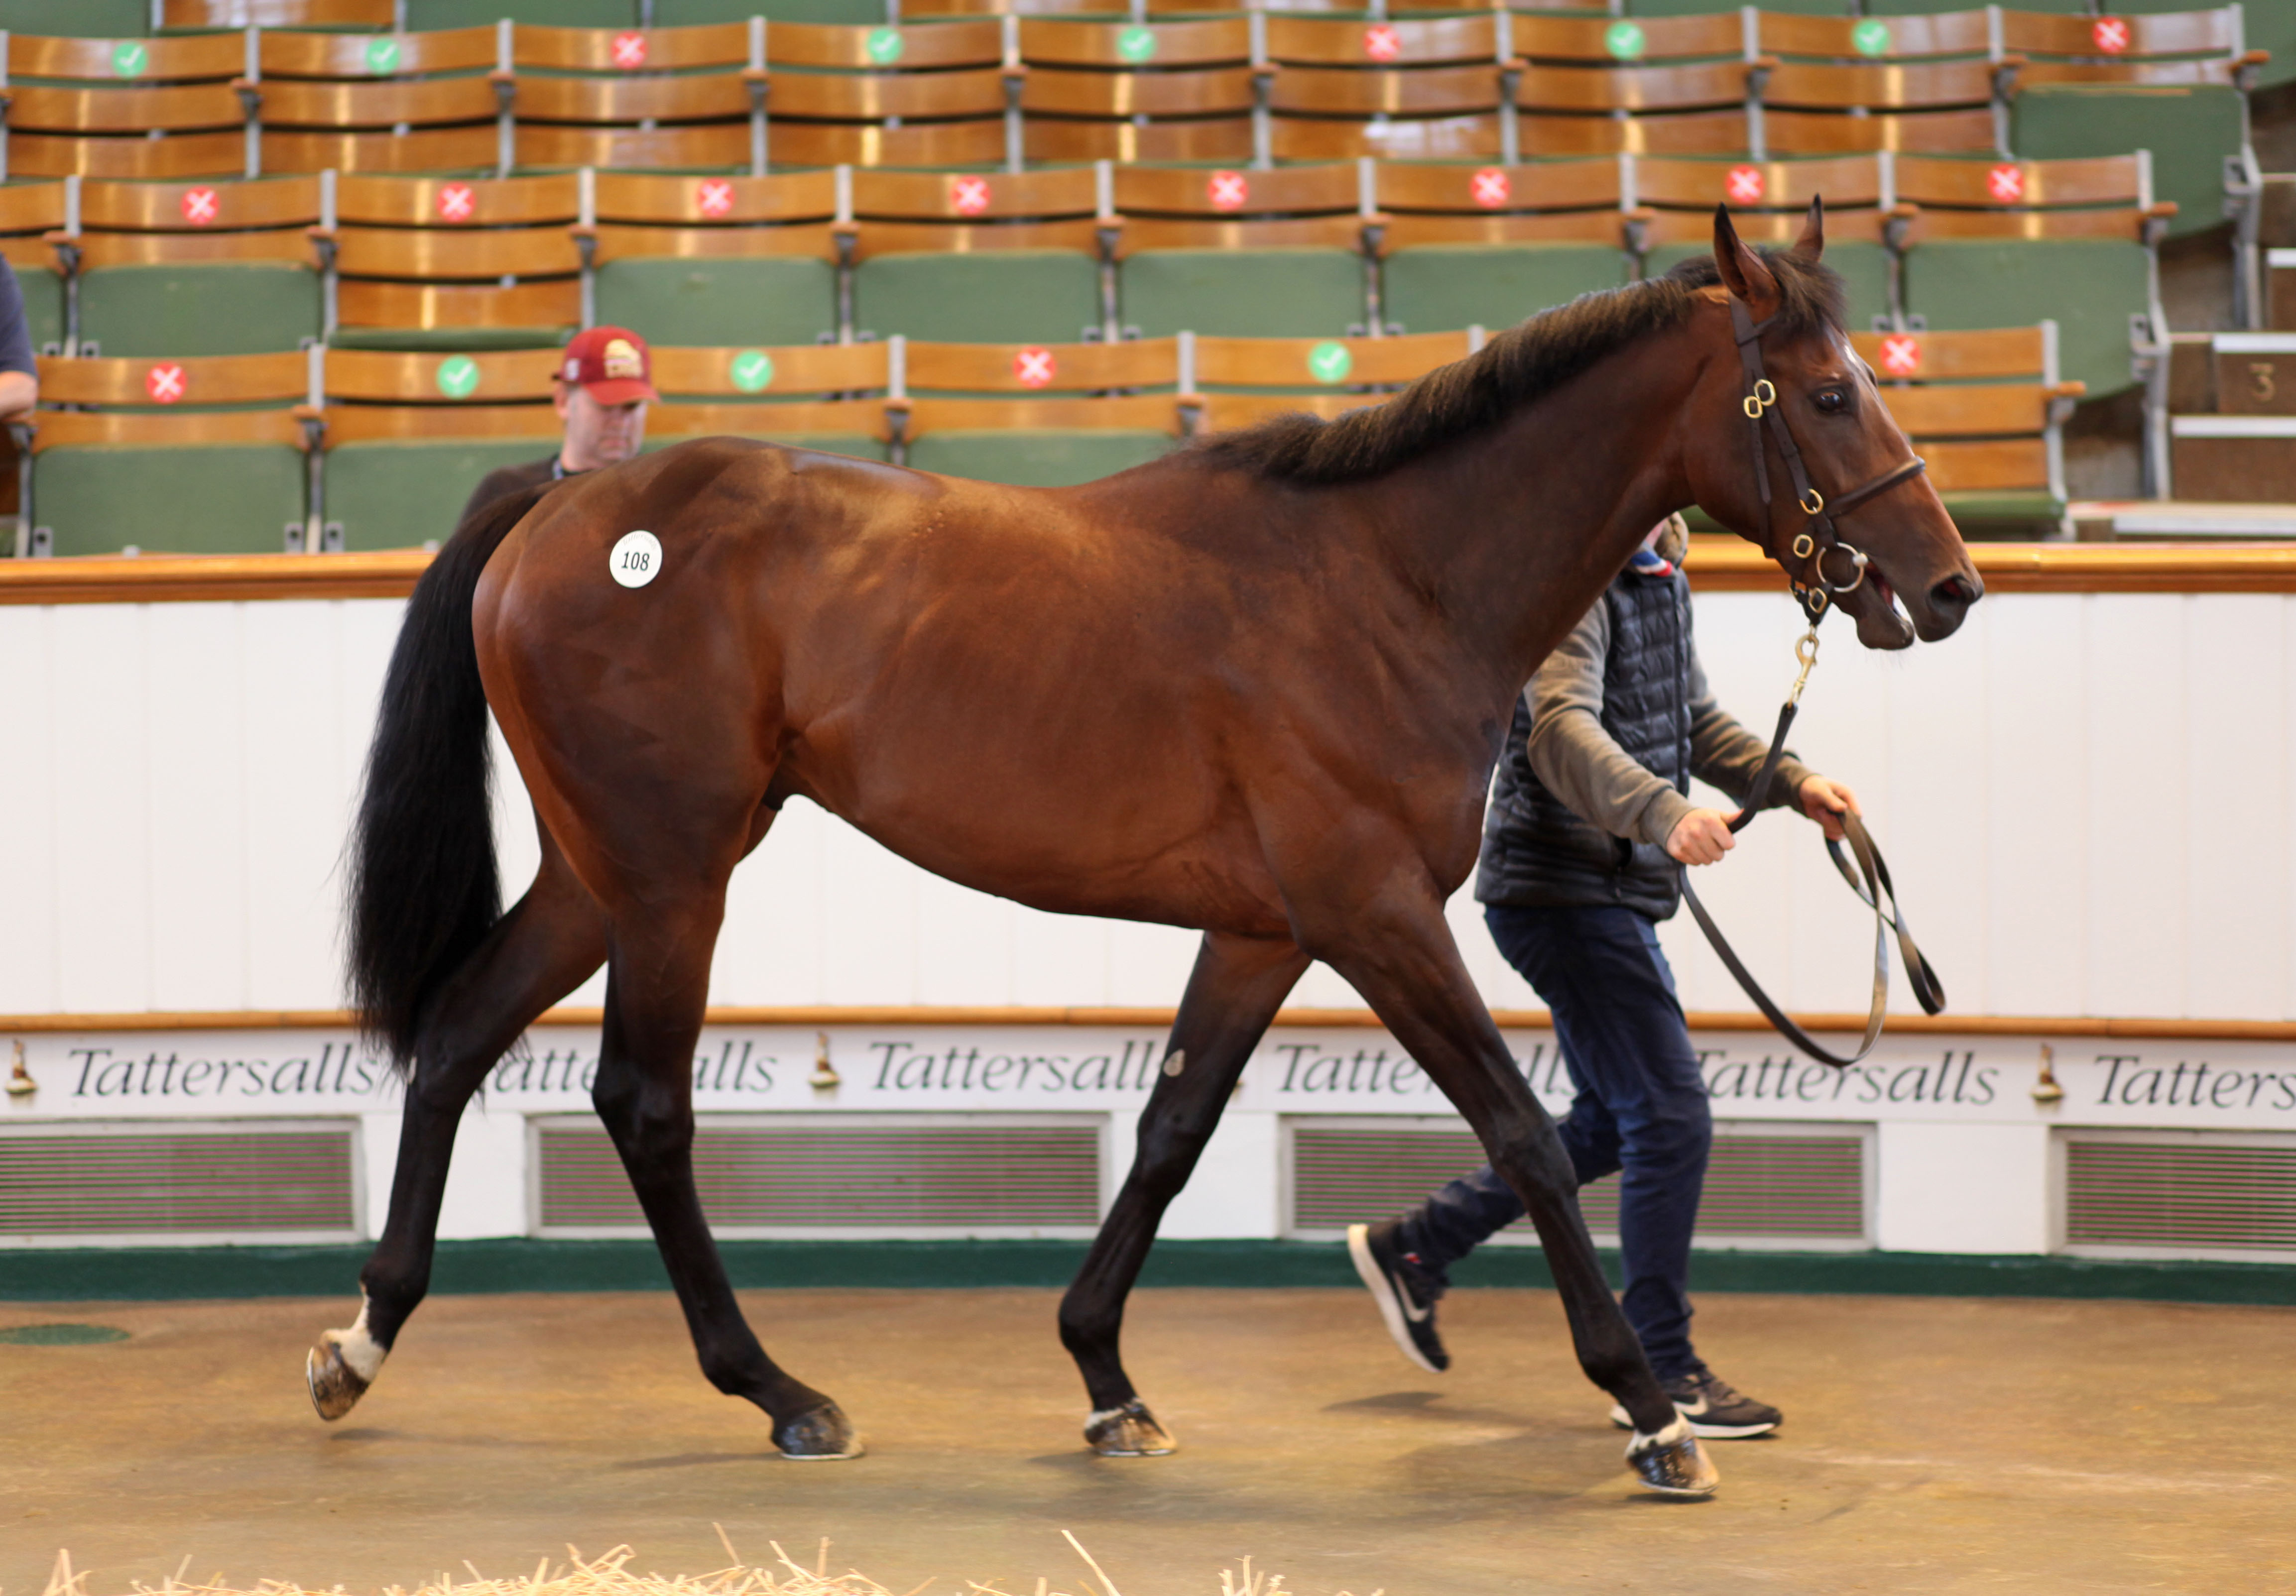 Lot 108 Excelebration - Open Book colt. Picture: Tattersalls.